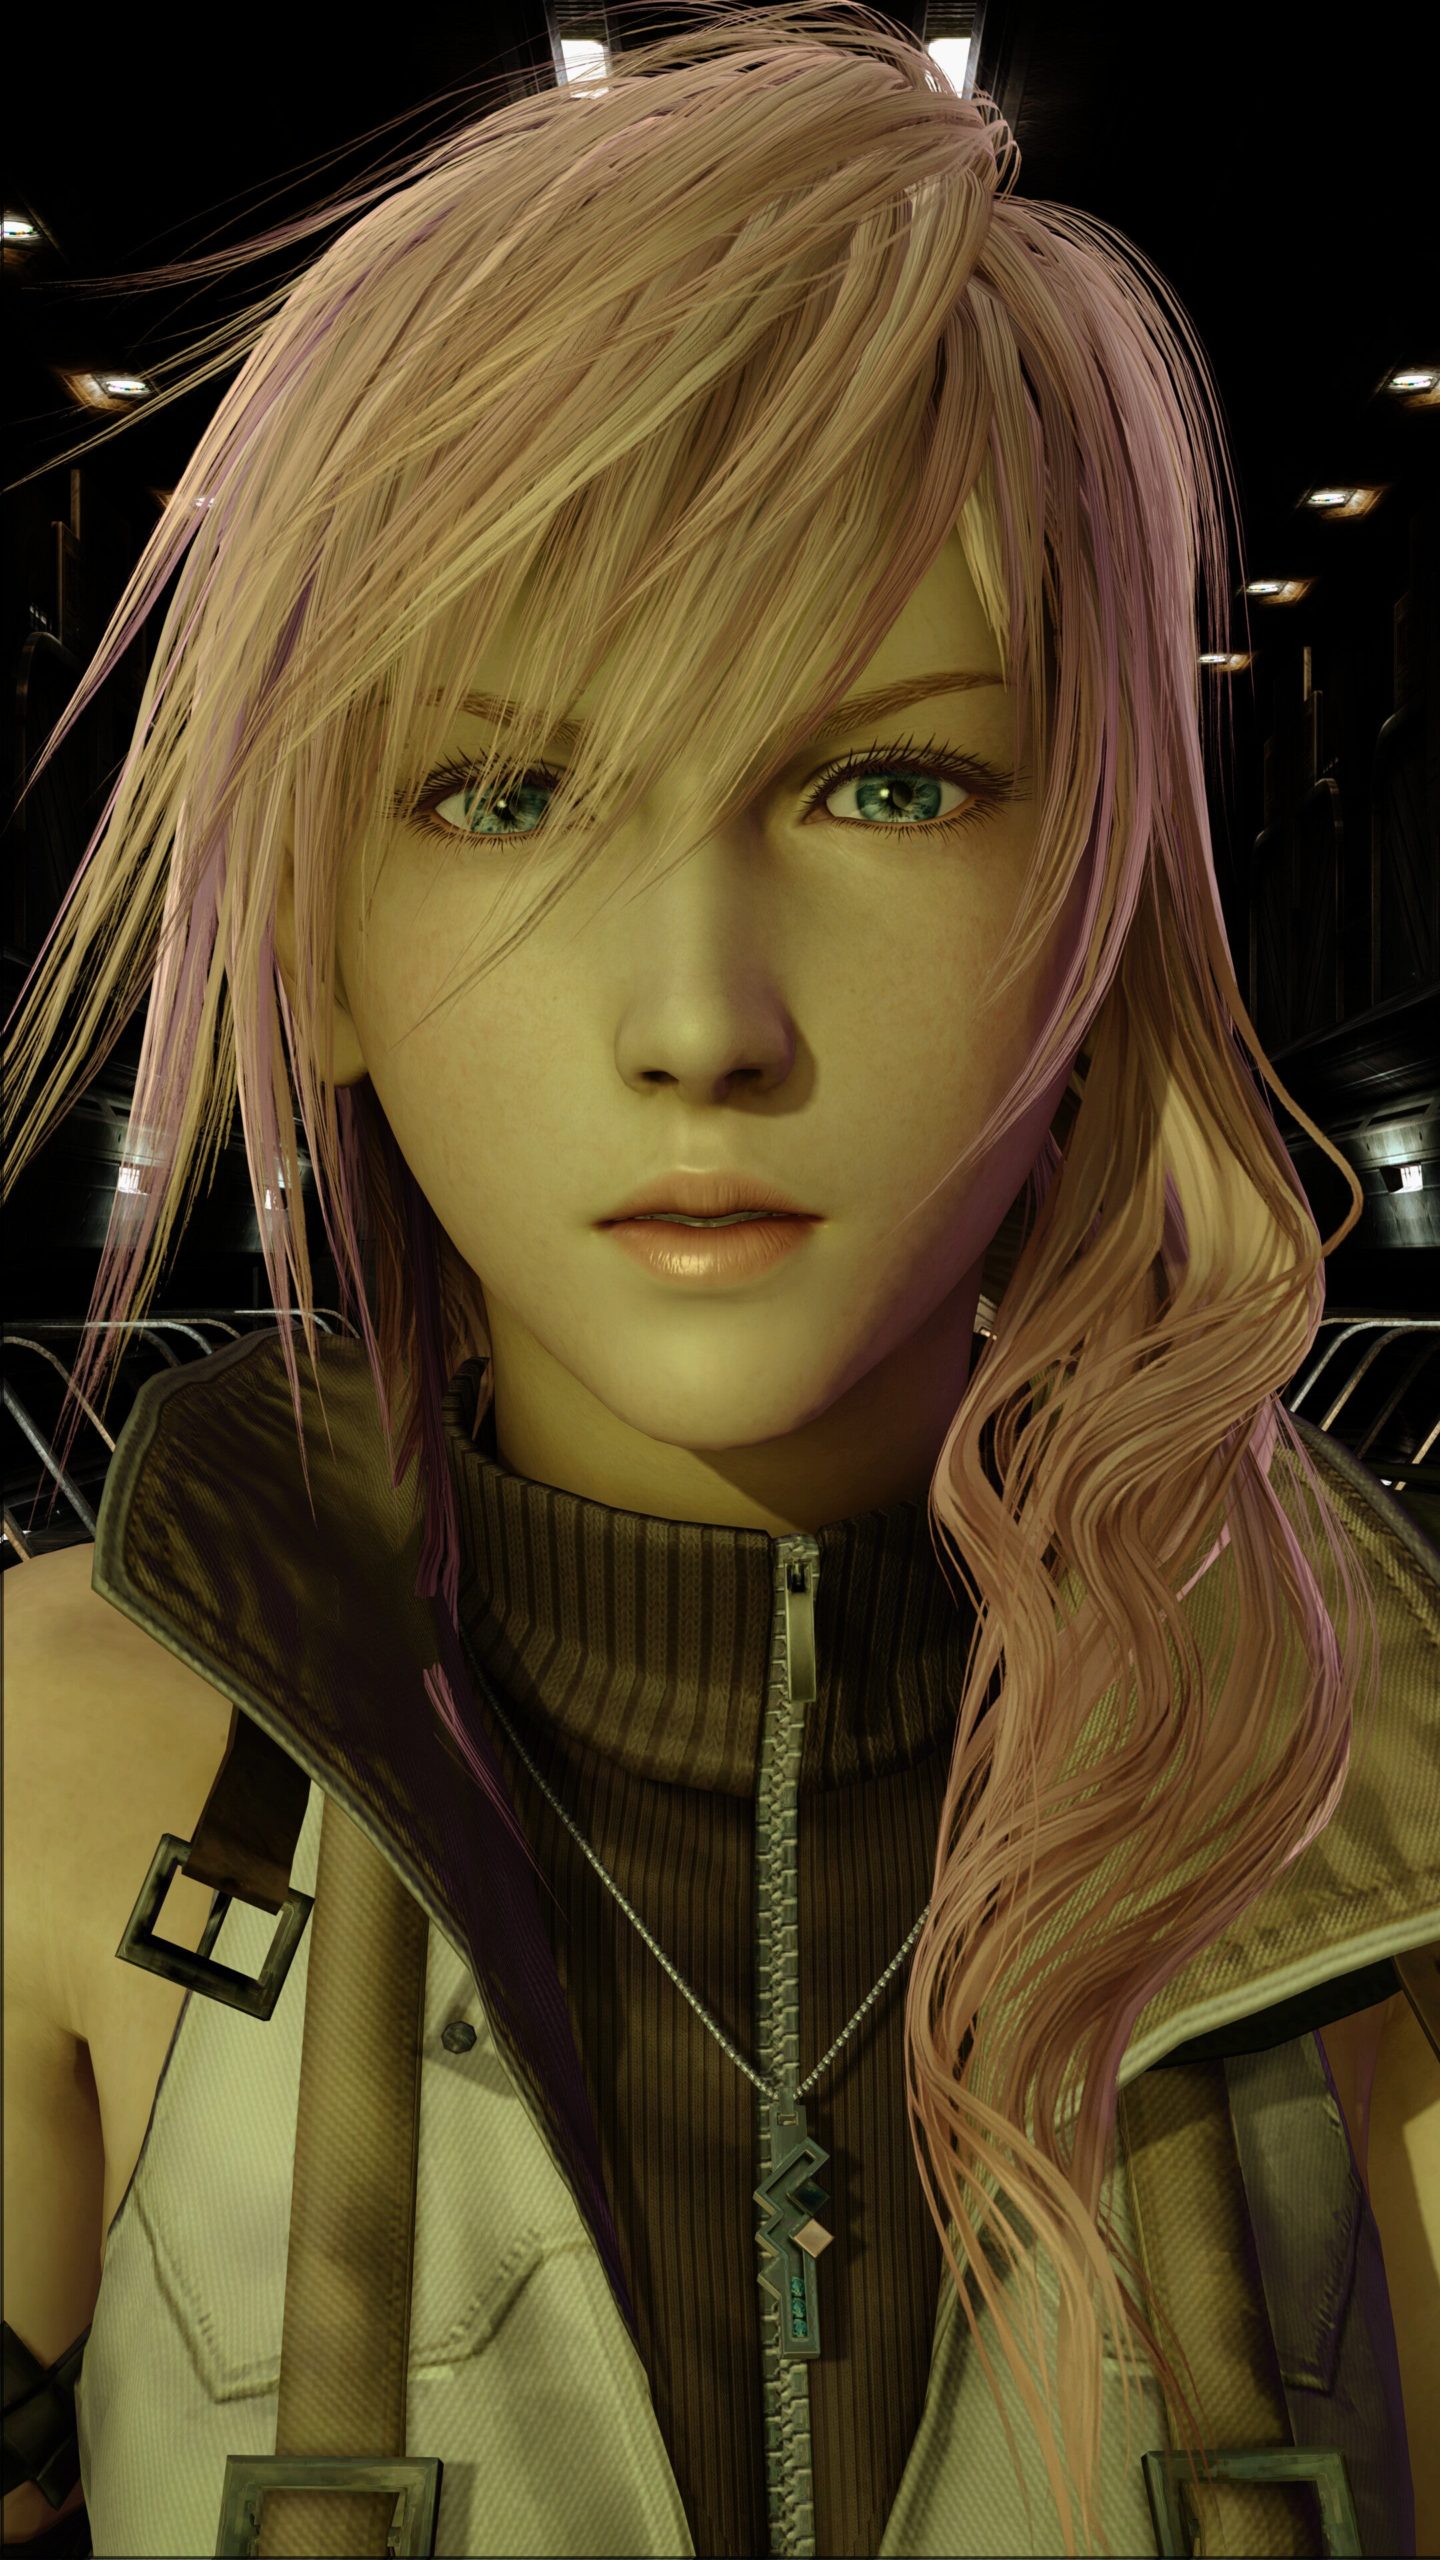 Final Fantasy XIII Mods Make 2009 Game Look Brand New